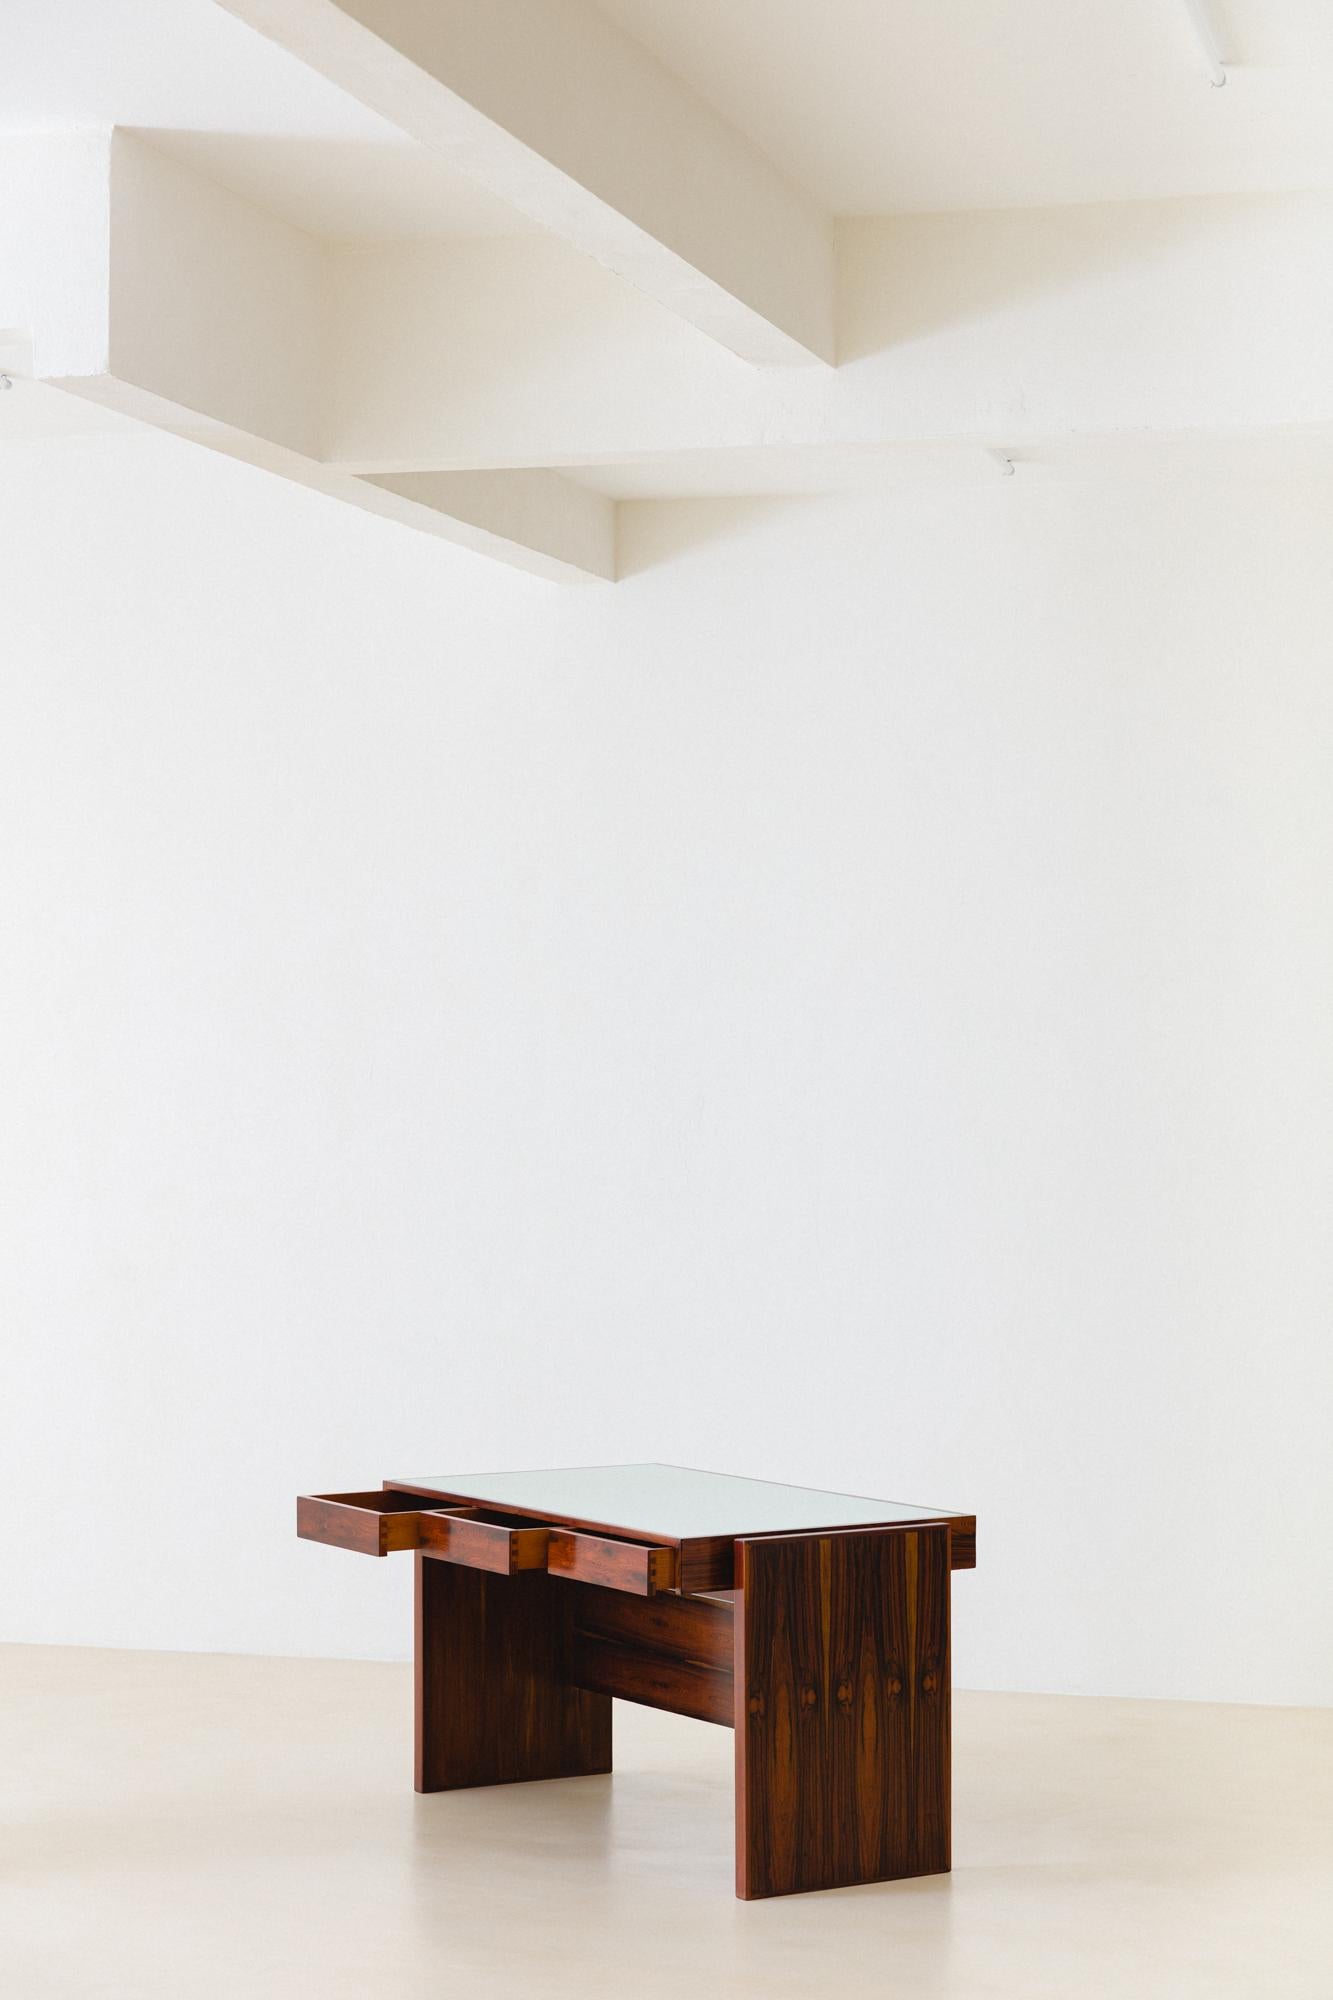 This exquisitely crafted rosewood desk designed by Joaquim Tenreiro (1906-1992) belonged to Bloch Editores S.A. Building, a Brazilian publisher founded in 1952 and closed in 2000, where Tenreiro furnished the interior. It presents a metal tag with